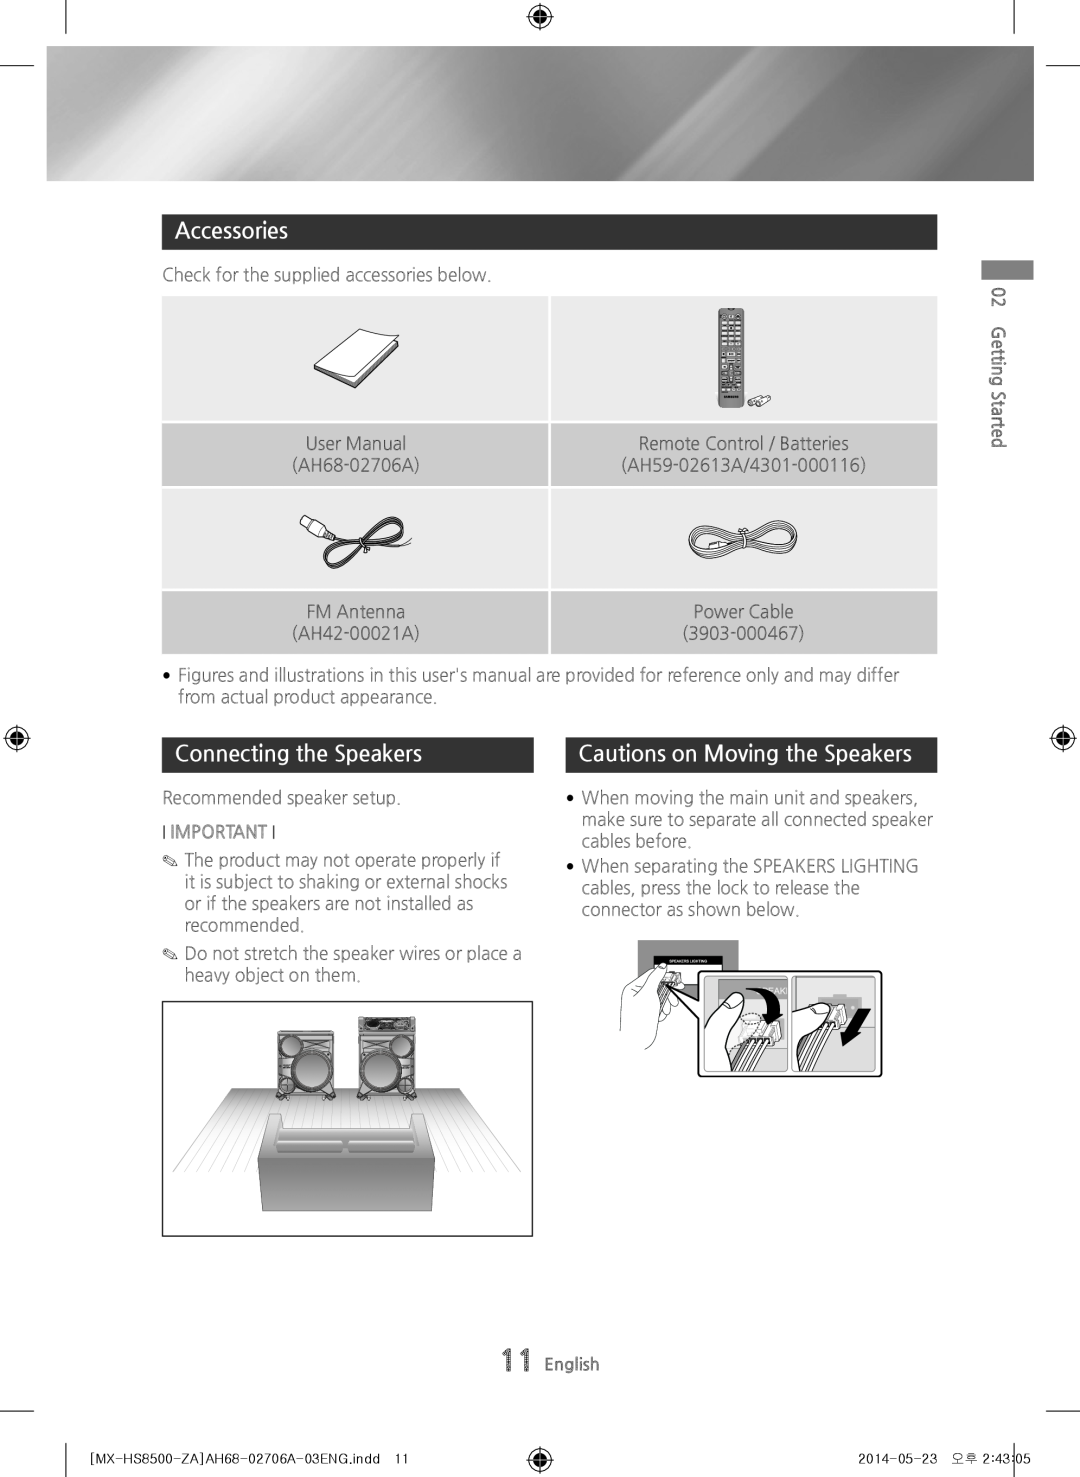 Samsung MX-HS8500 user manual Accessories, Connecting the Speakers, Cautions on Moving the Speakers, Important 